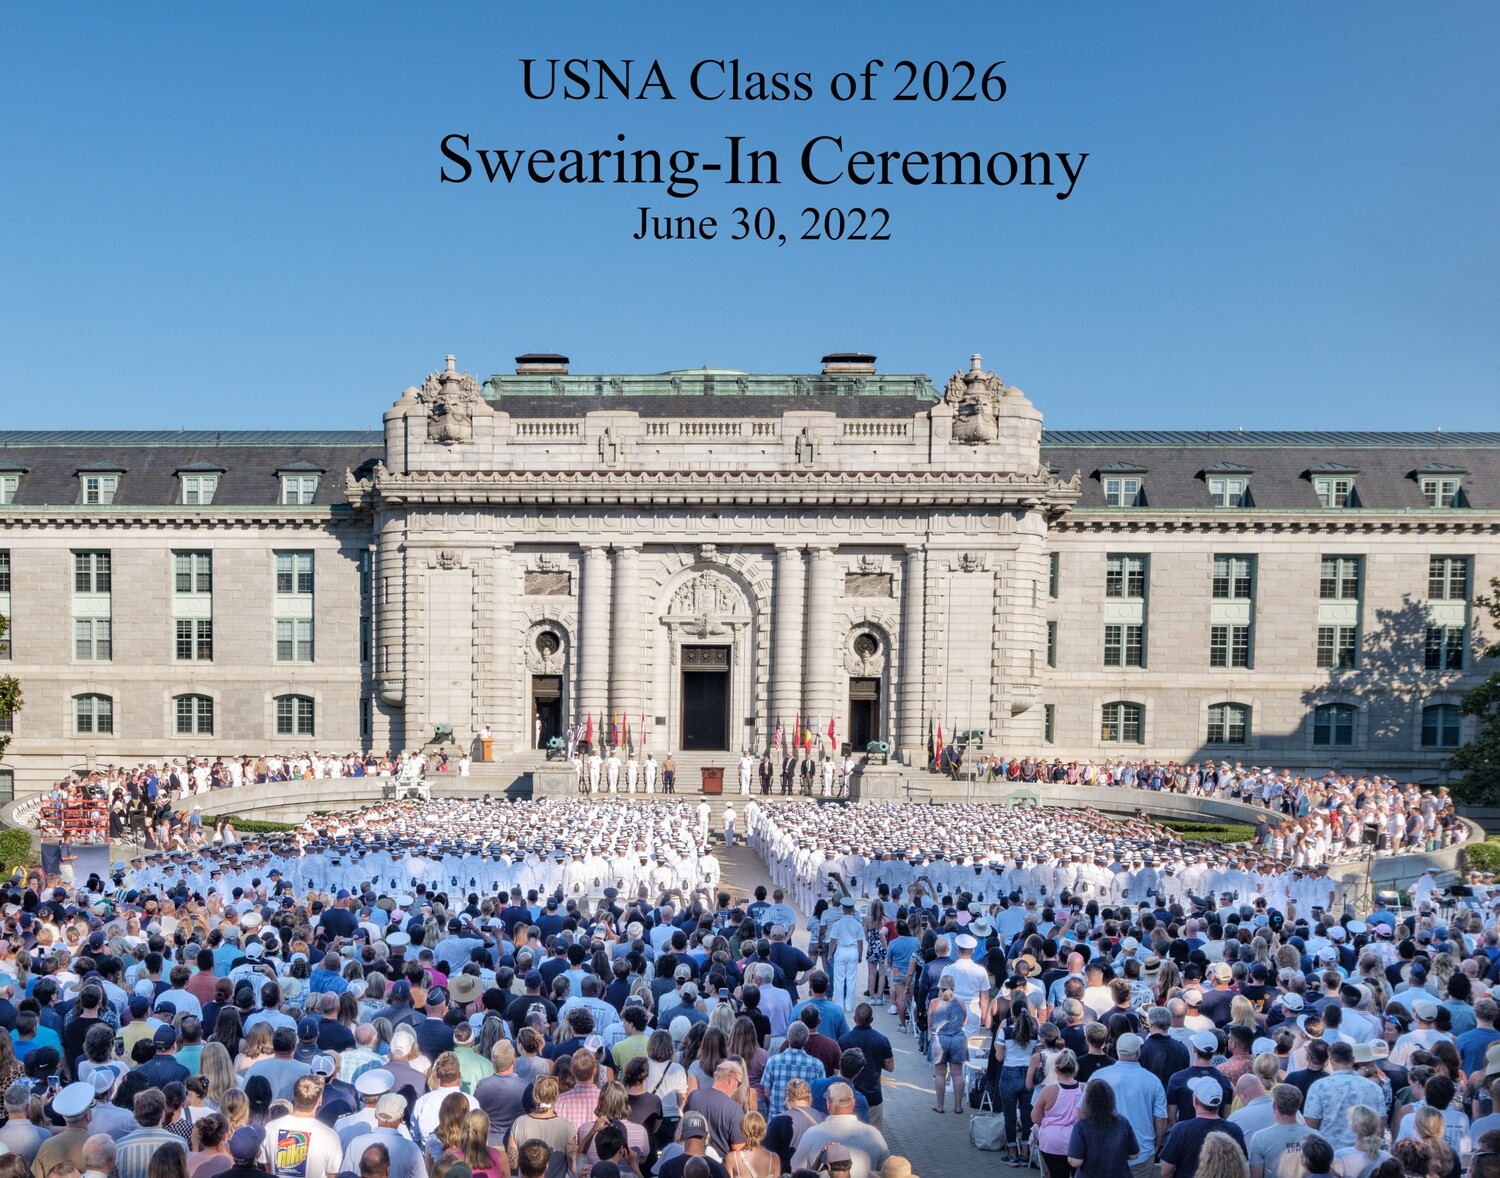 Class of 2026 Swearing-In Ceremony